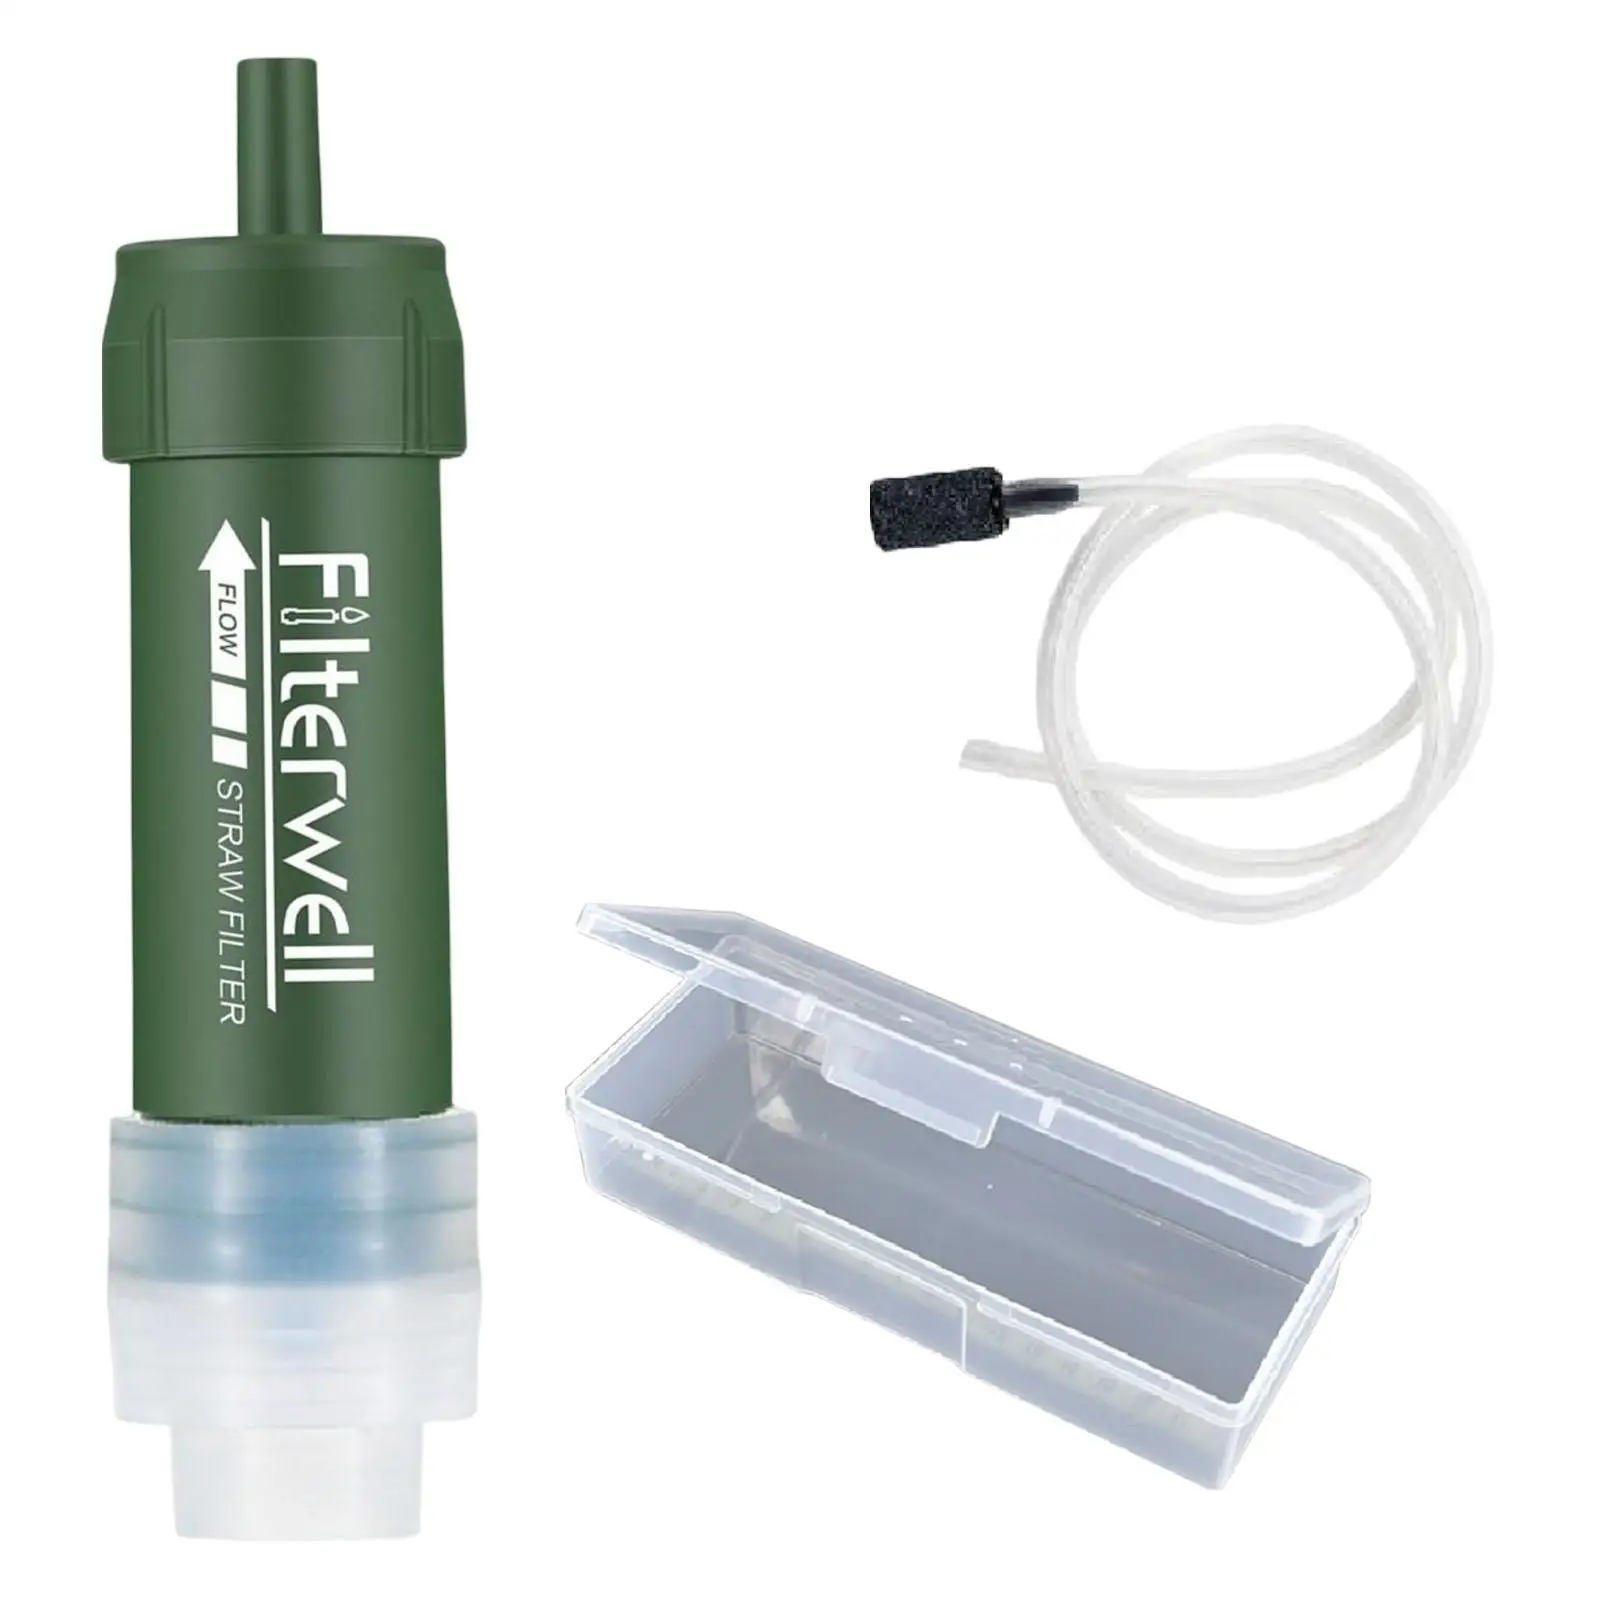 Personal Water Filter Straw Filtration System Purifier Camping Survival Water Purifying Device Drinking for Travelling Hiking